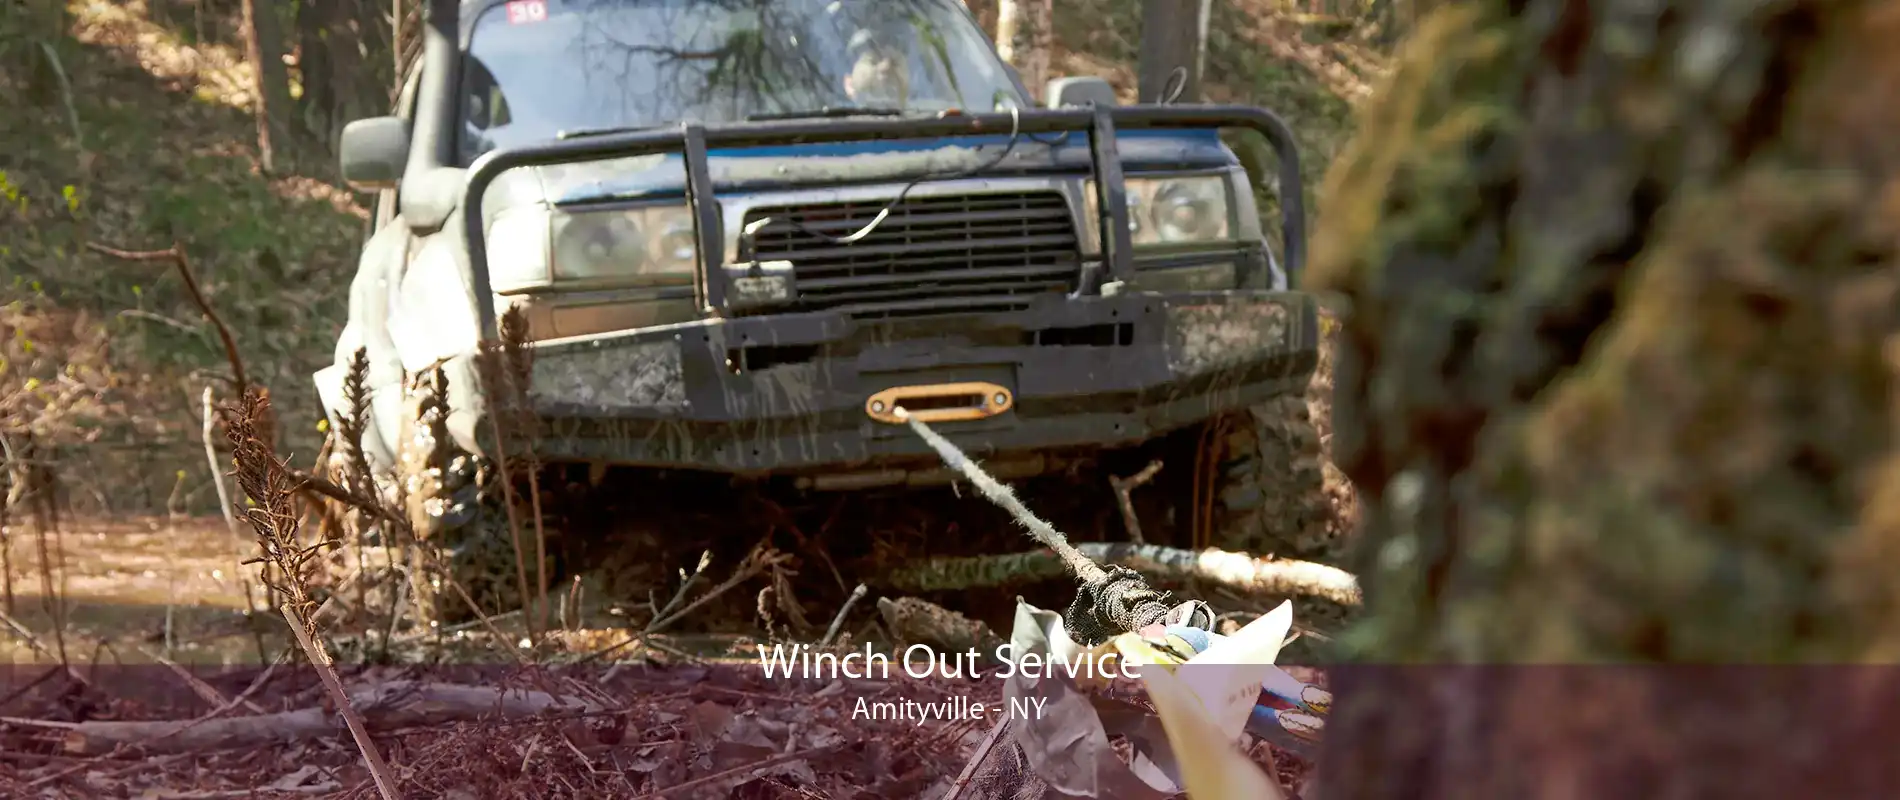 Winch Out Service Amityville - NY